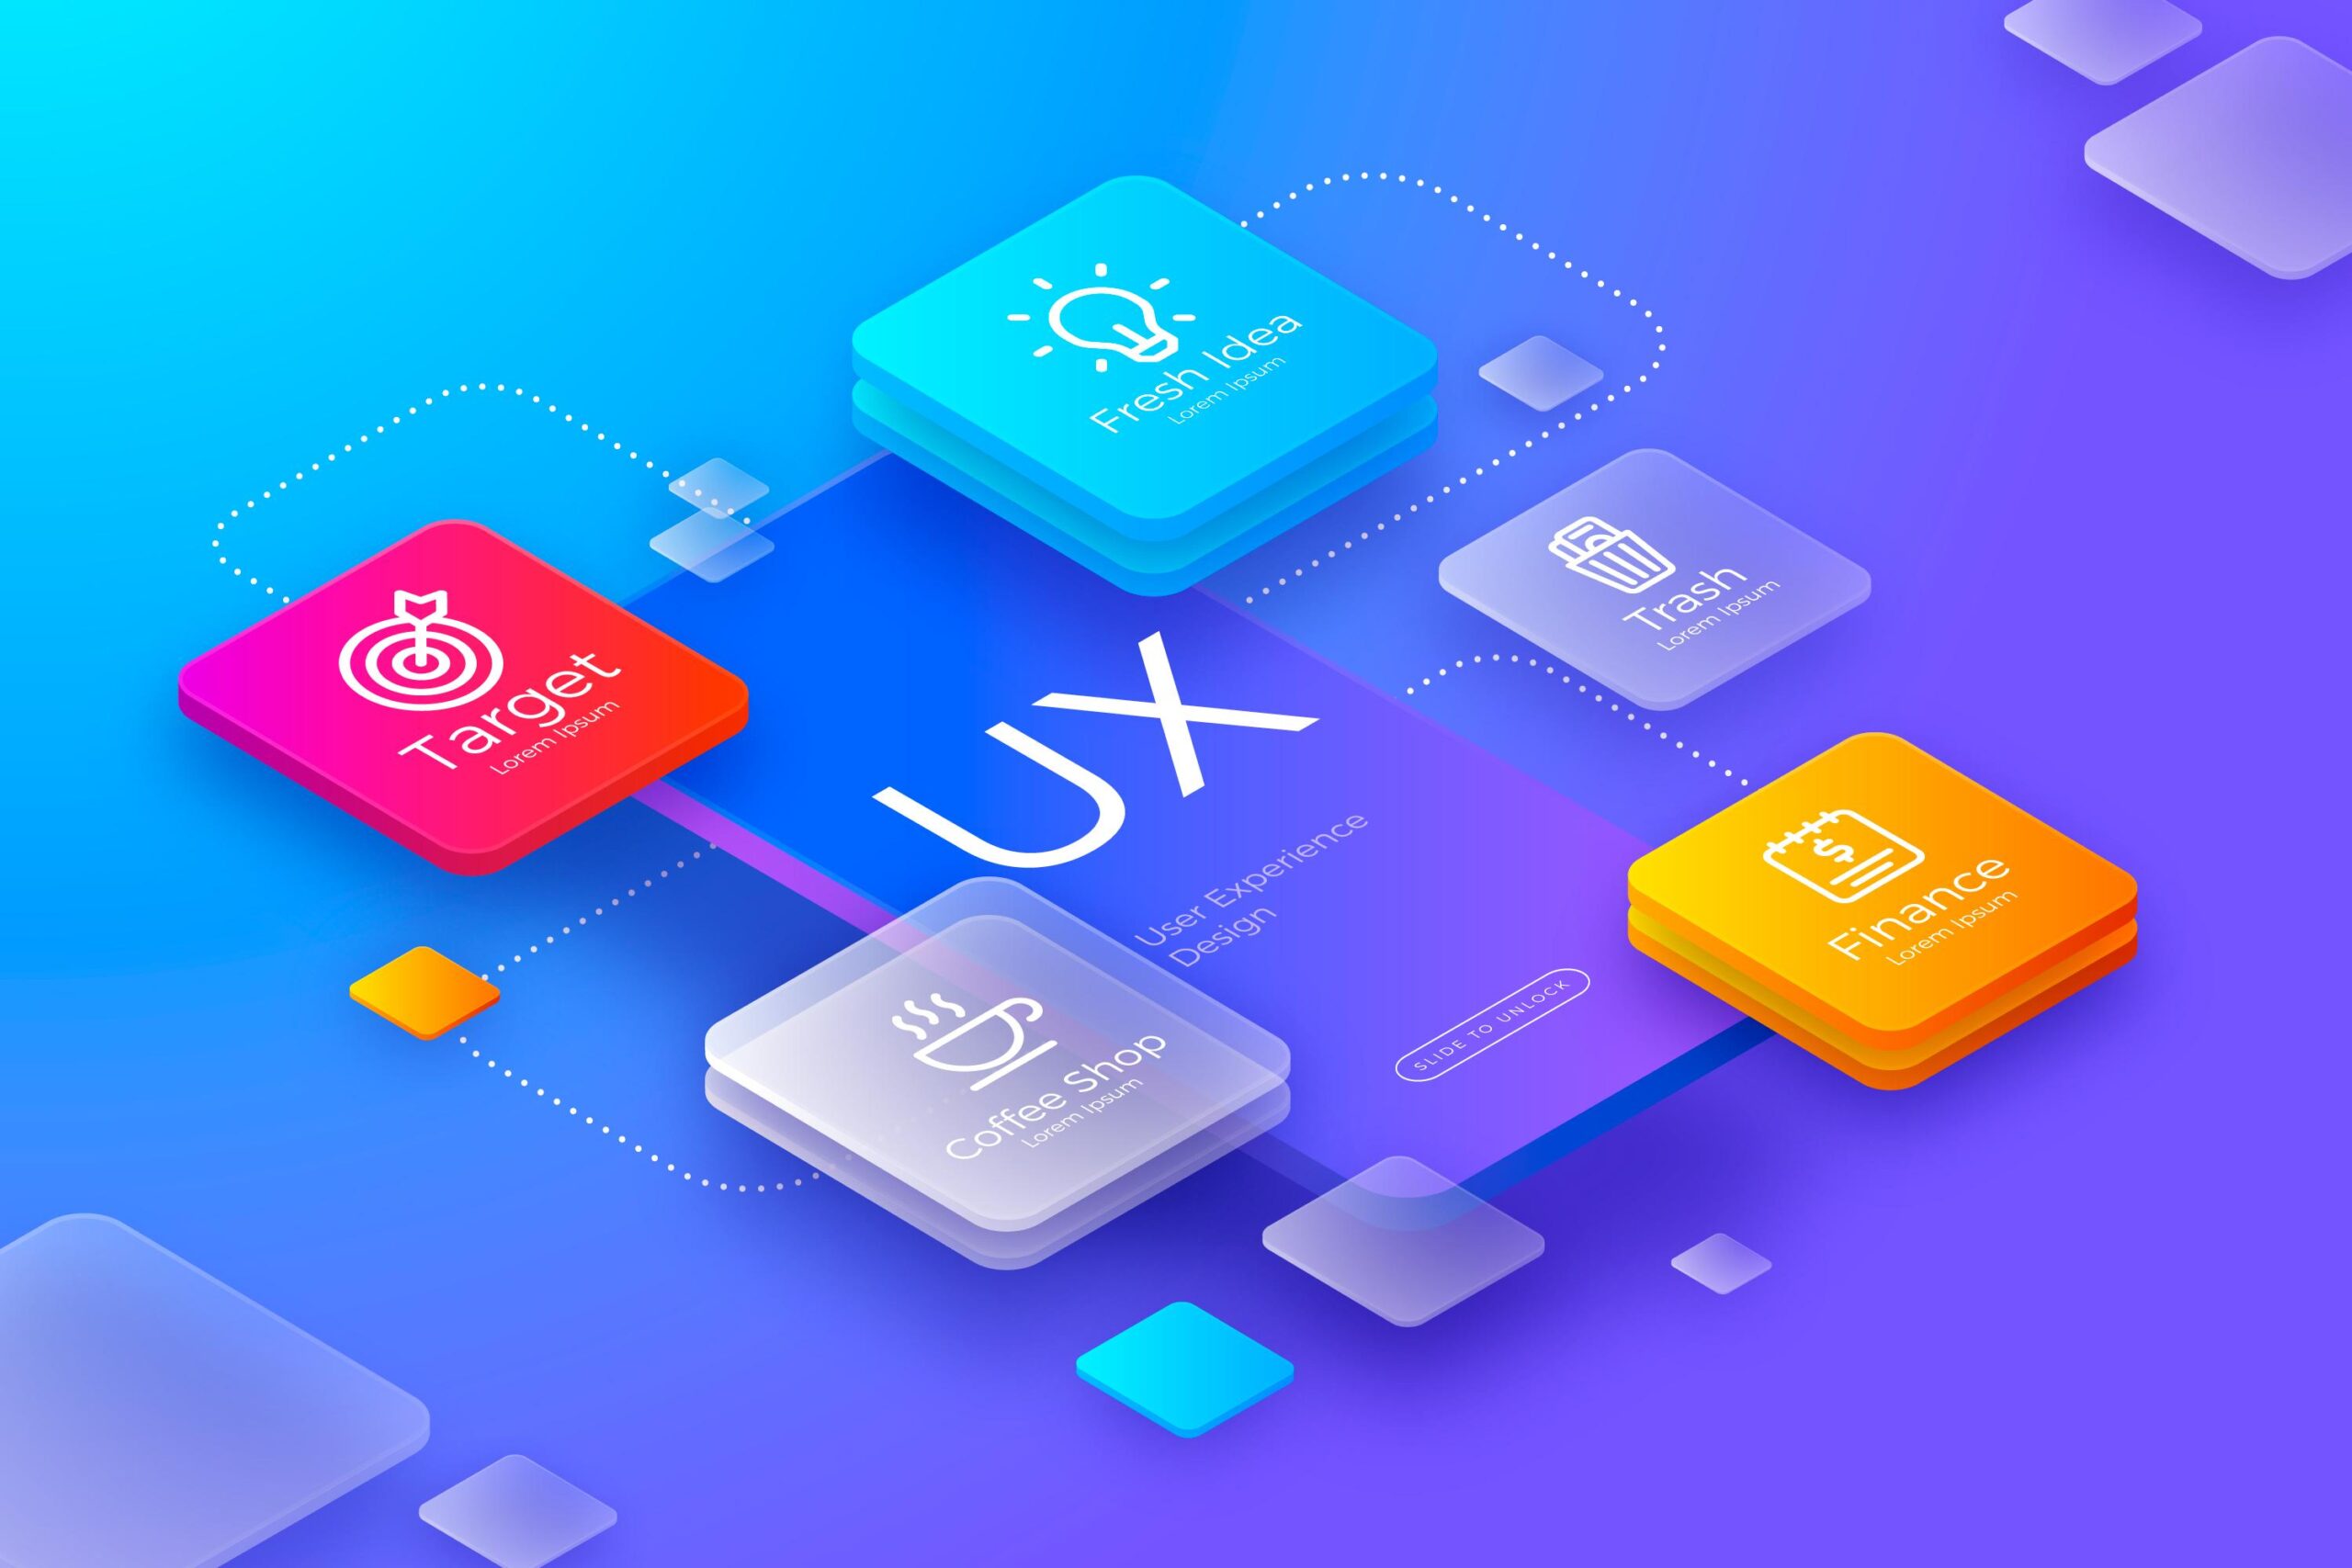 UX design doesn’t end with your website design